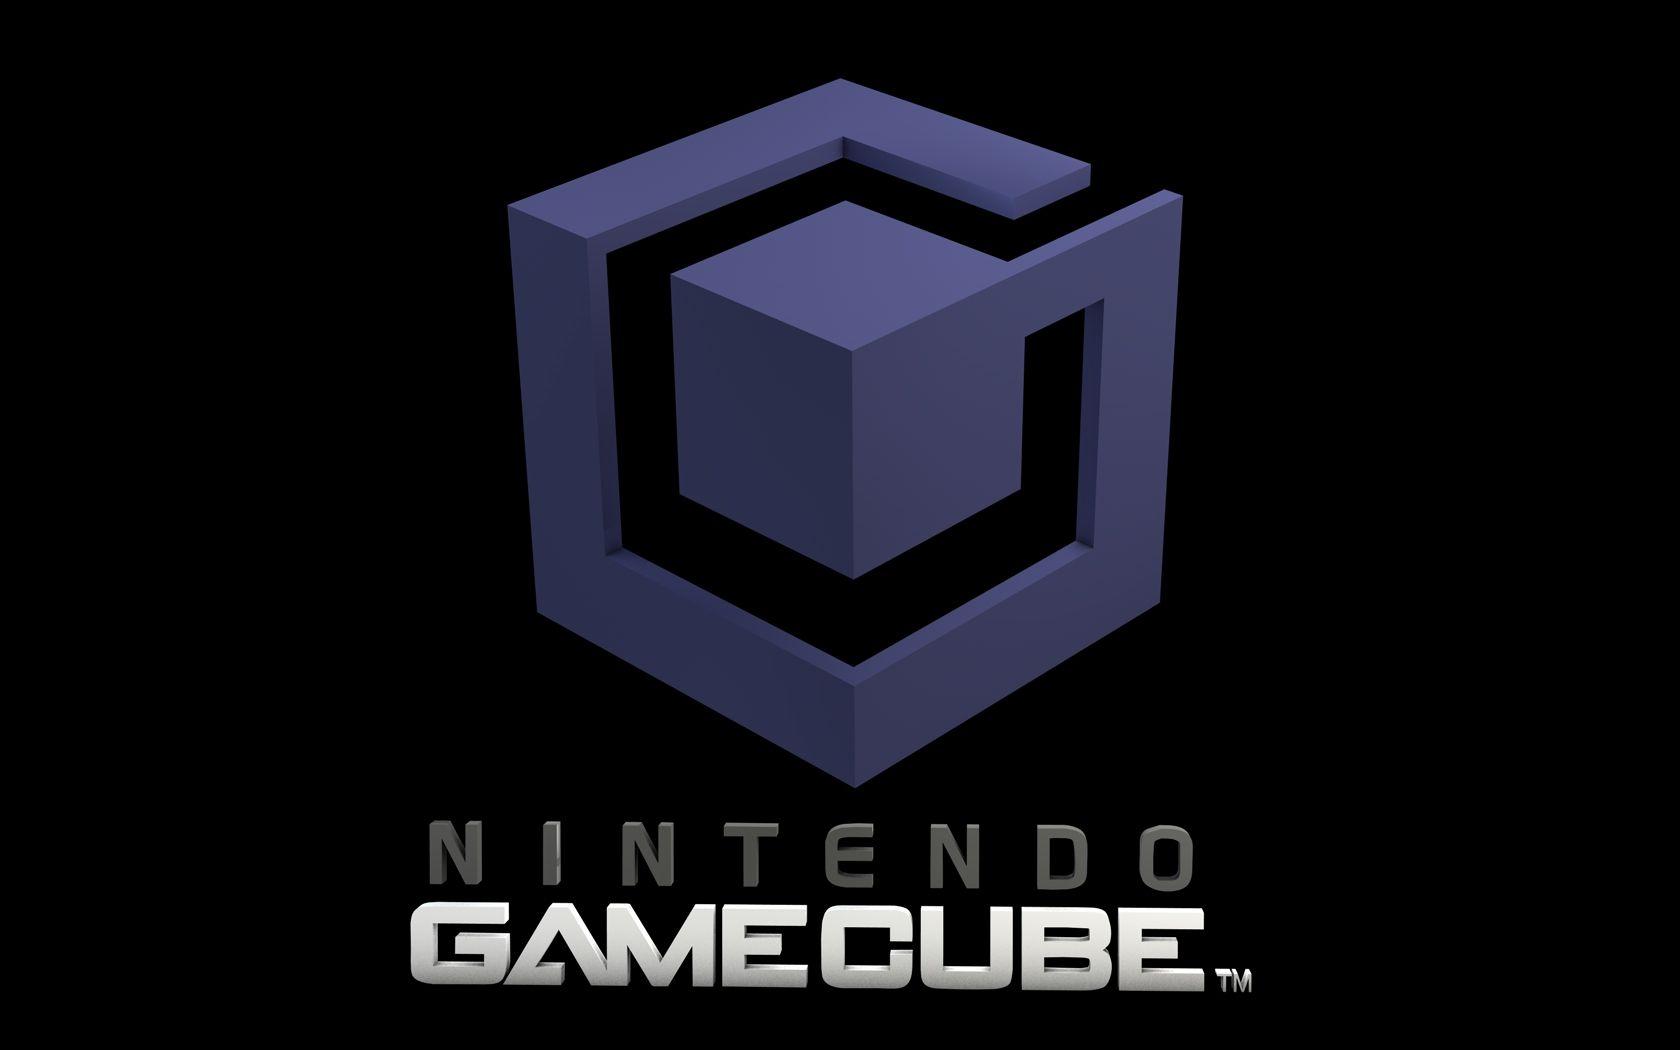 GameStop on X Happy birthday to the Nintendo GameCube released 20 years  ago today in North America 20 years later which GameCube game would you  say turned out to be the MOST